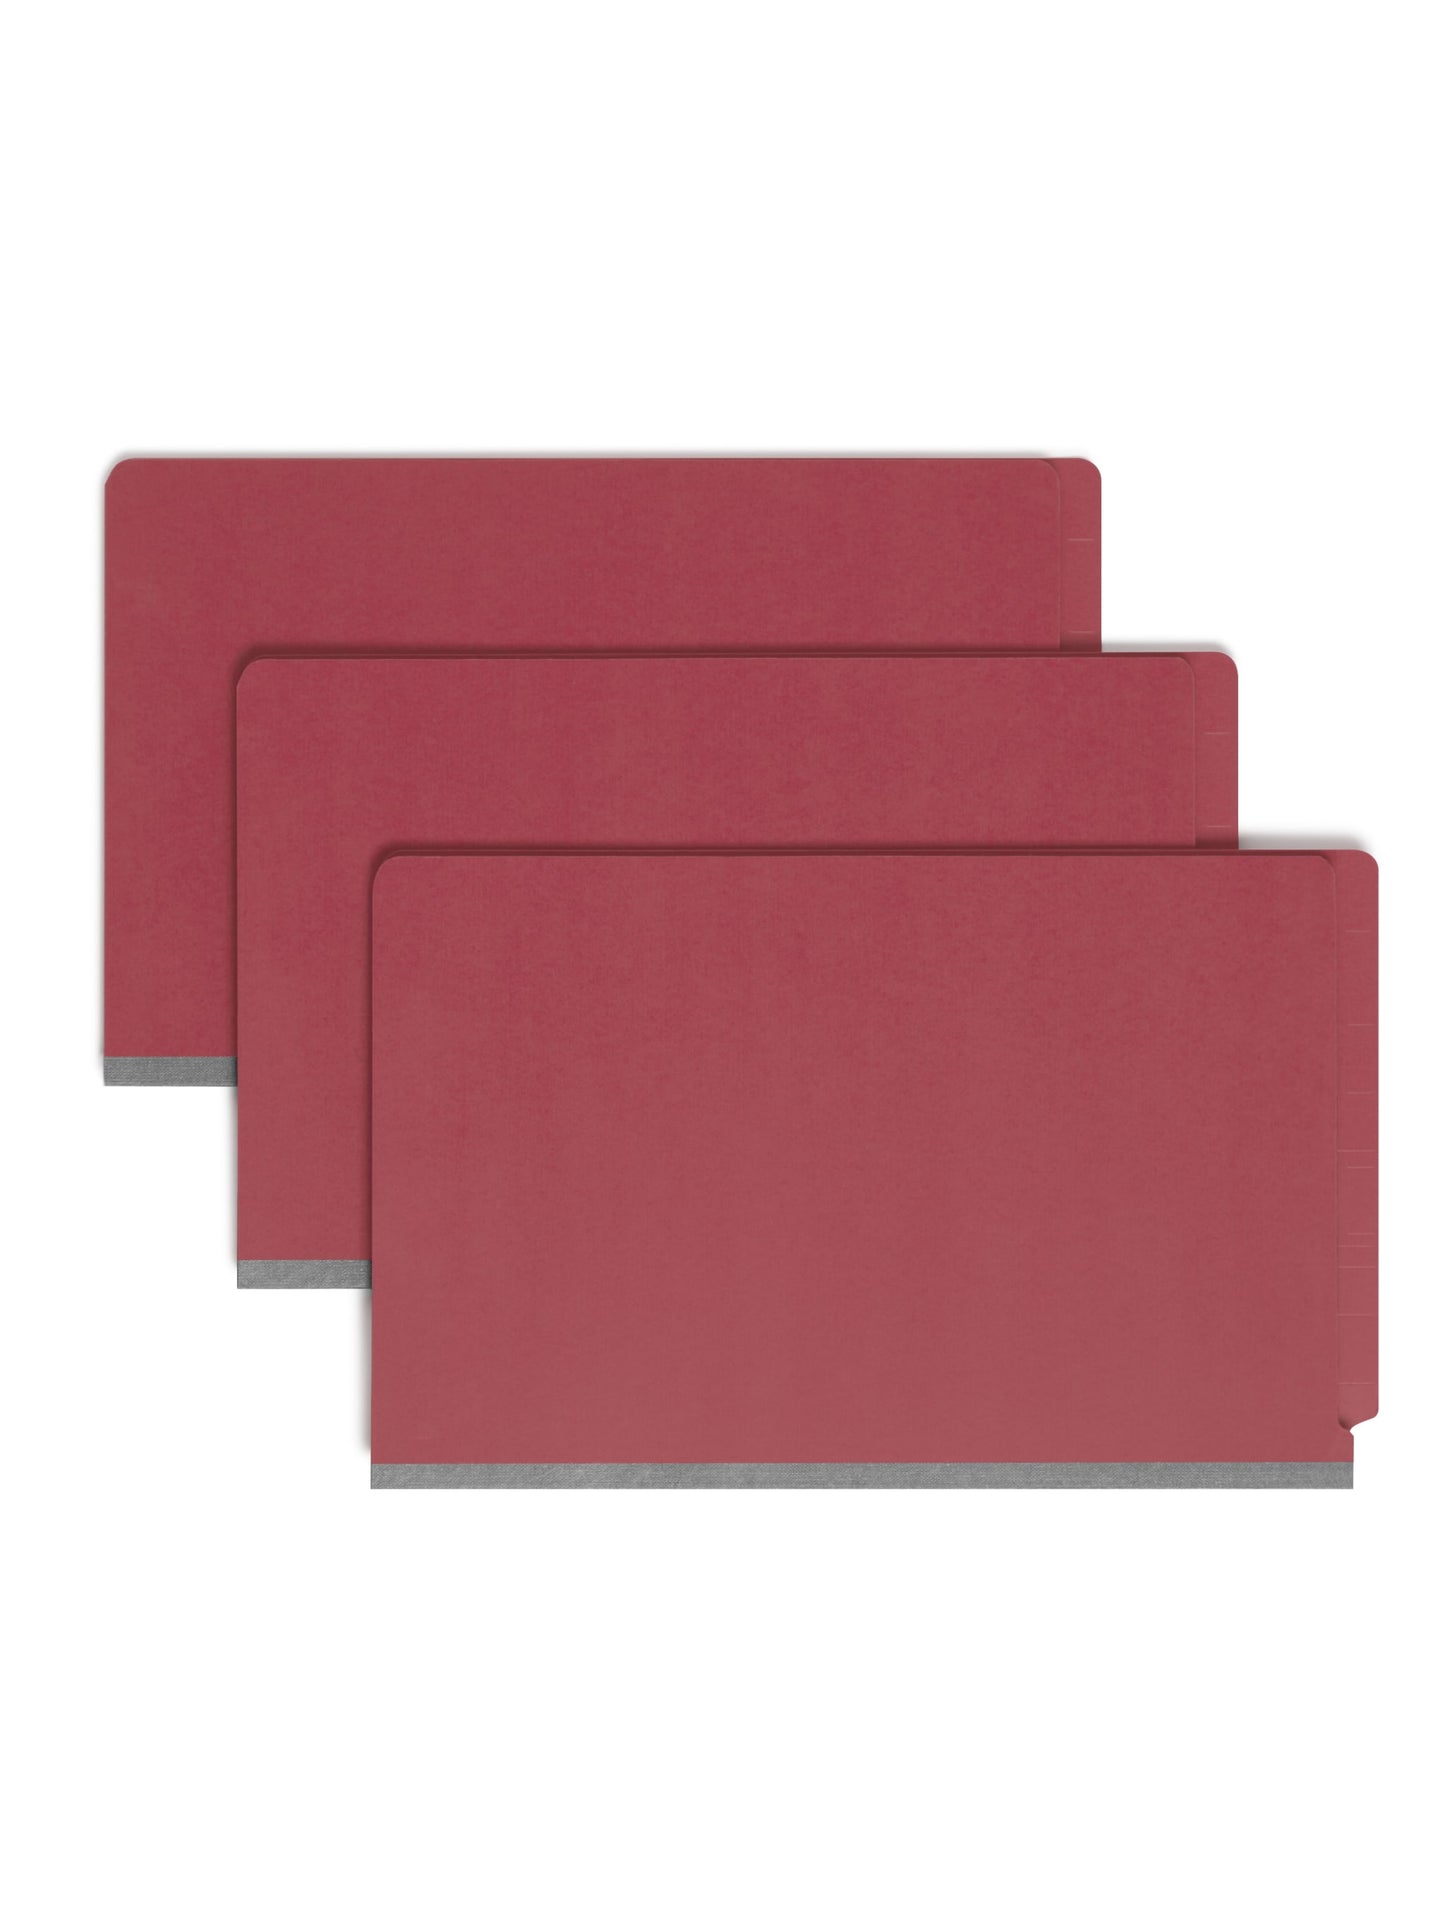 SafeSHIELD® Pressboard End Tab Classification File Folders, Straight-Cut Tab, 2 inch Expansion, 2 Divider, Bright Red Color, Legal Size, Set of 0, 30086486297838